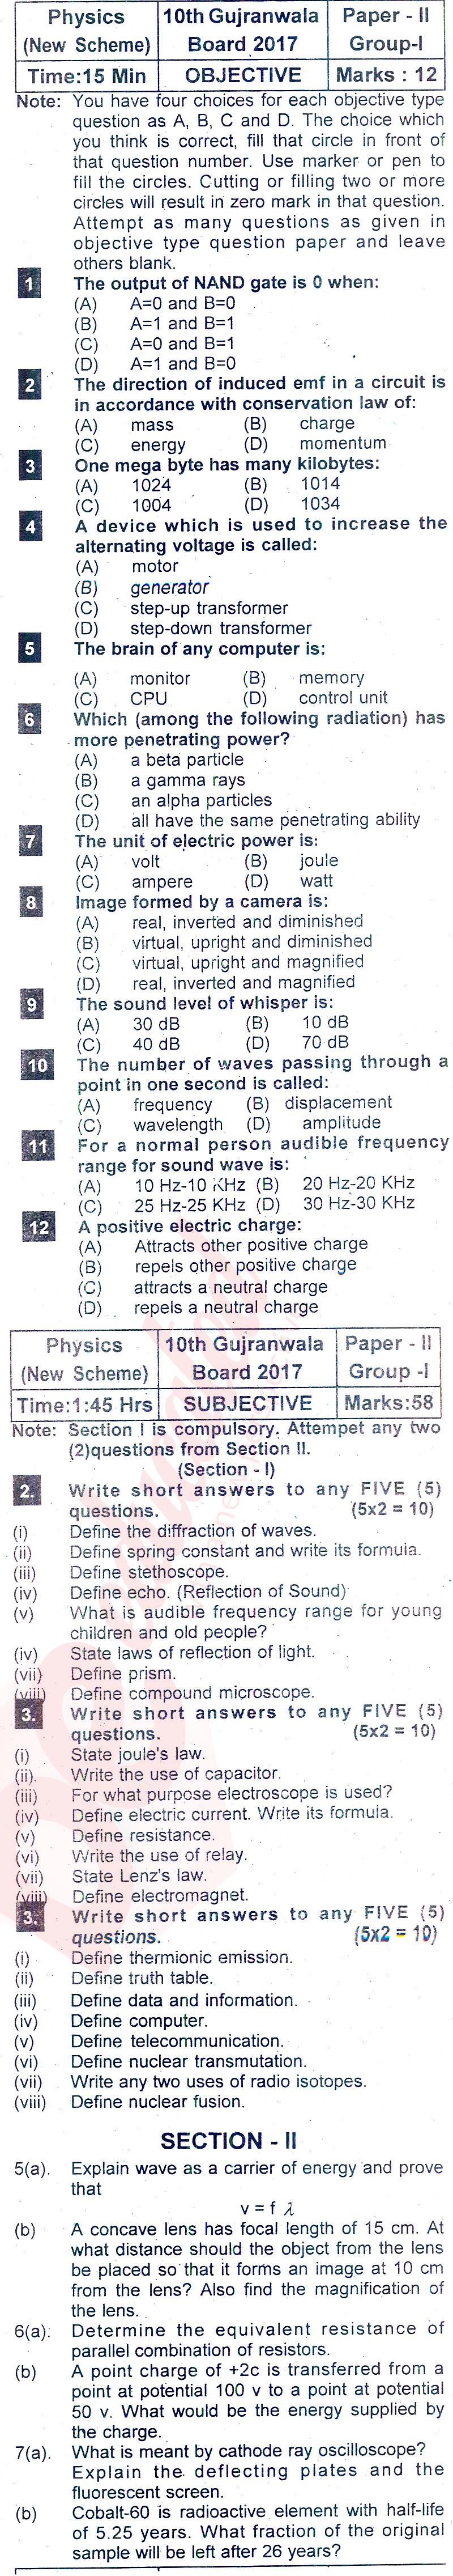 Physics 10th class Past Paper Group 1 BISE Gujranwala 2017